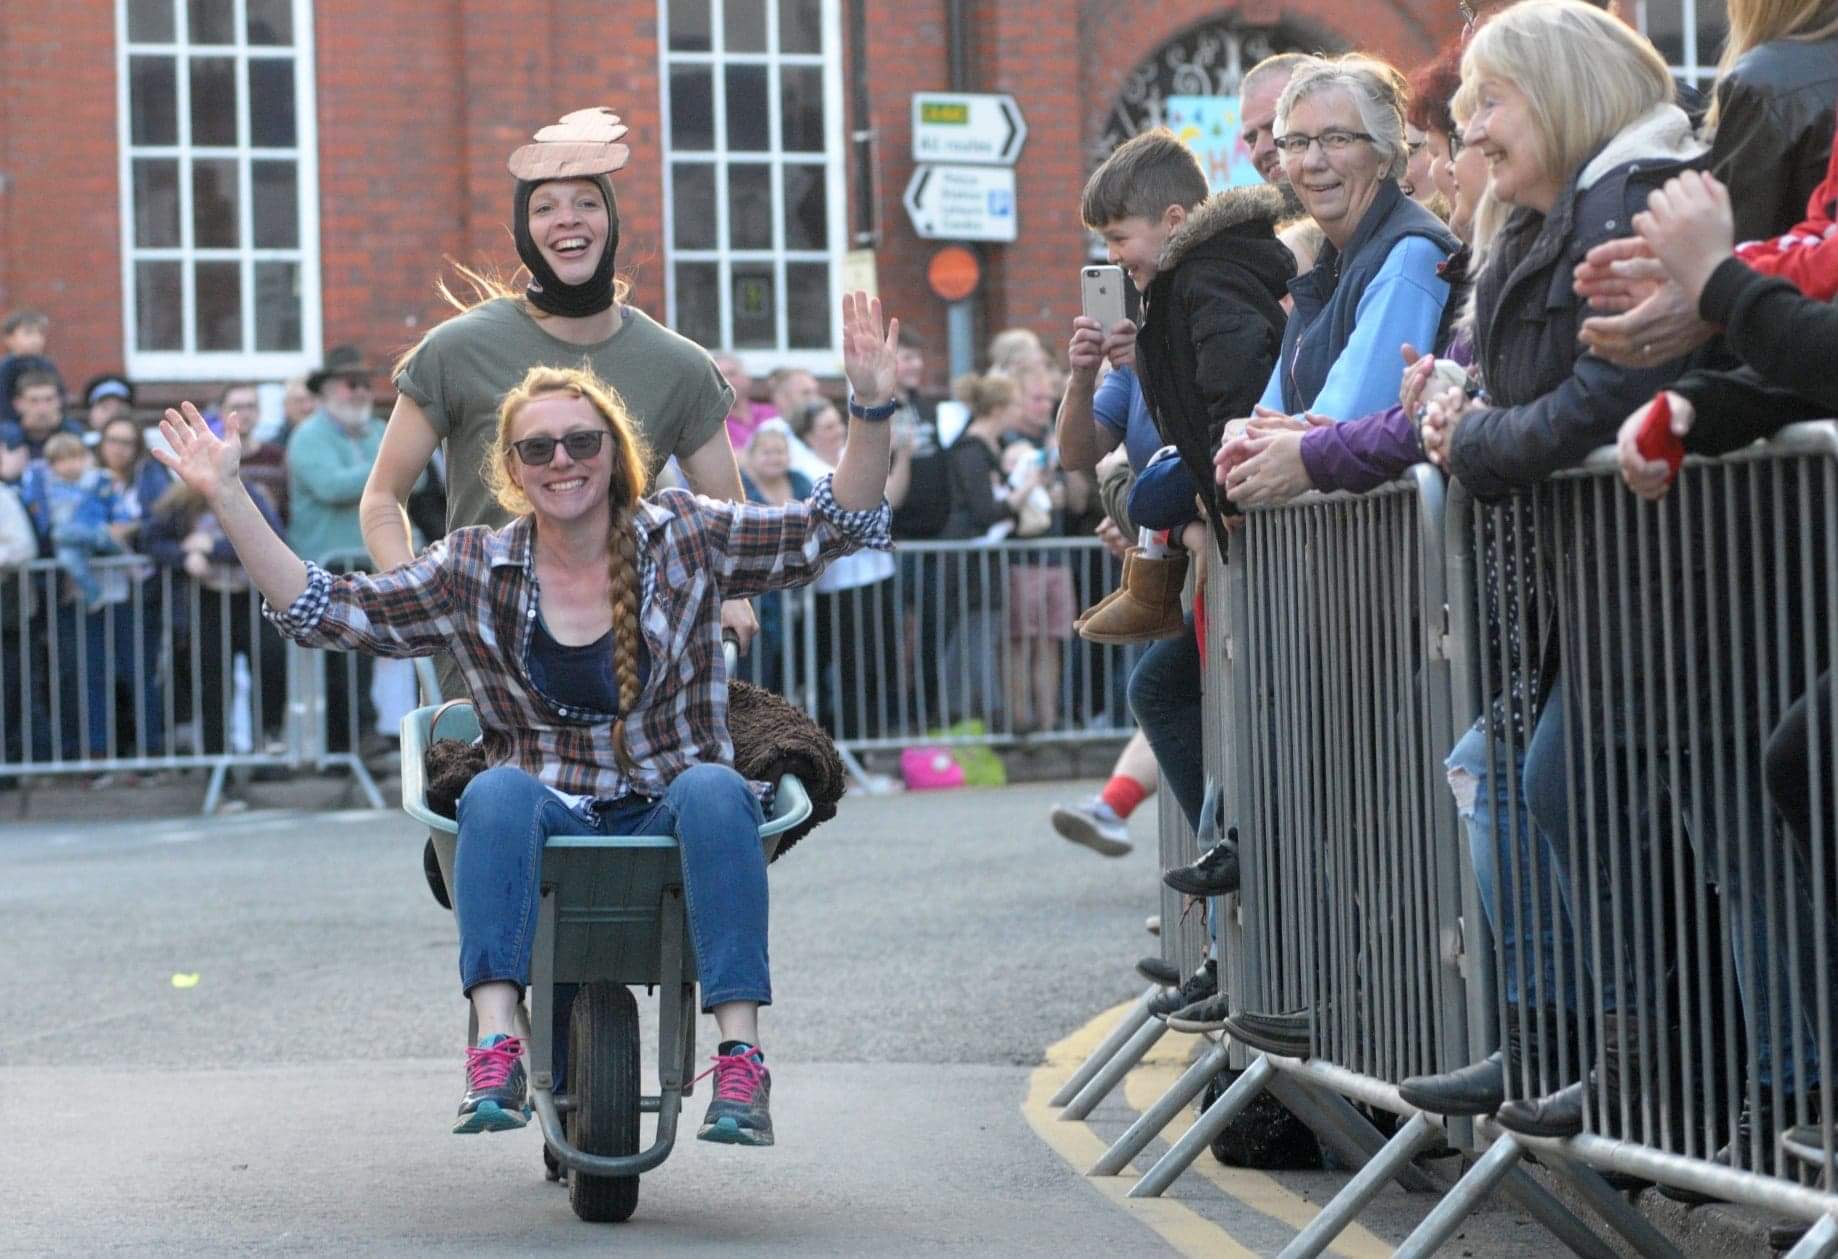 WHAT’S ON? | A popular  wheelbarrow race is set to take place in Kington later today and the locals can’t wait!